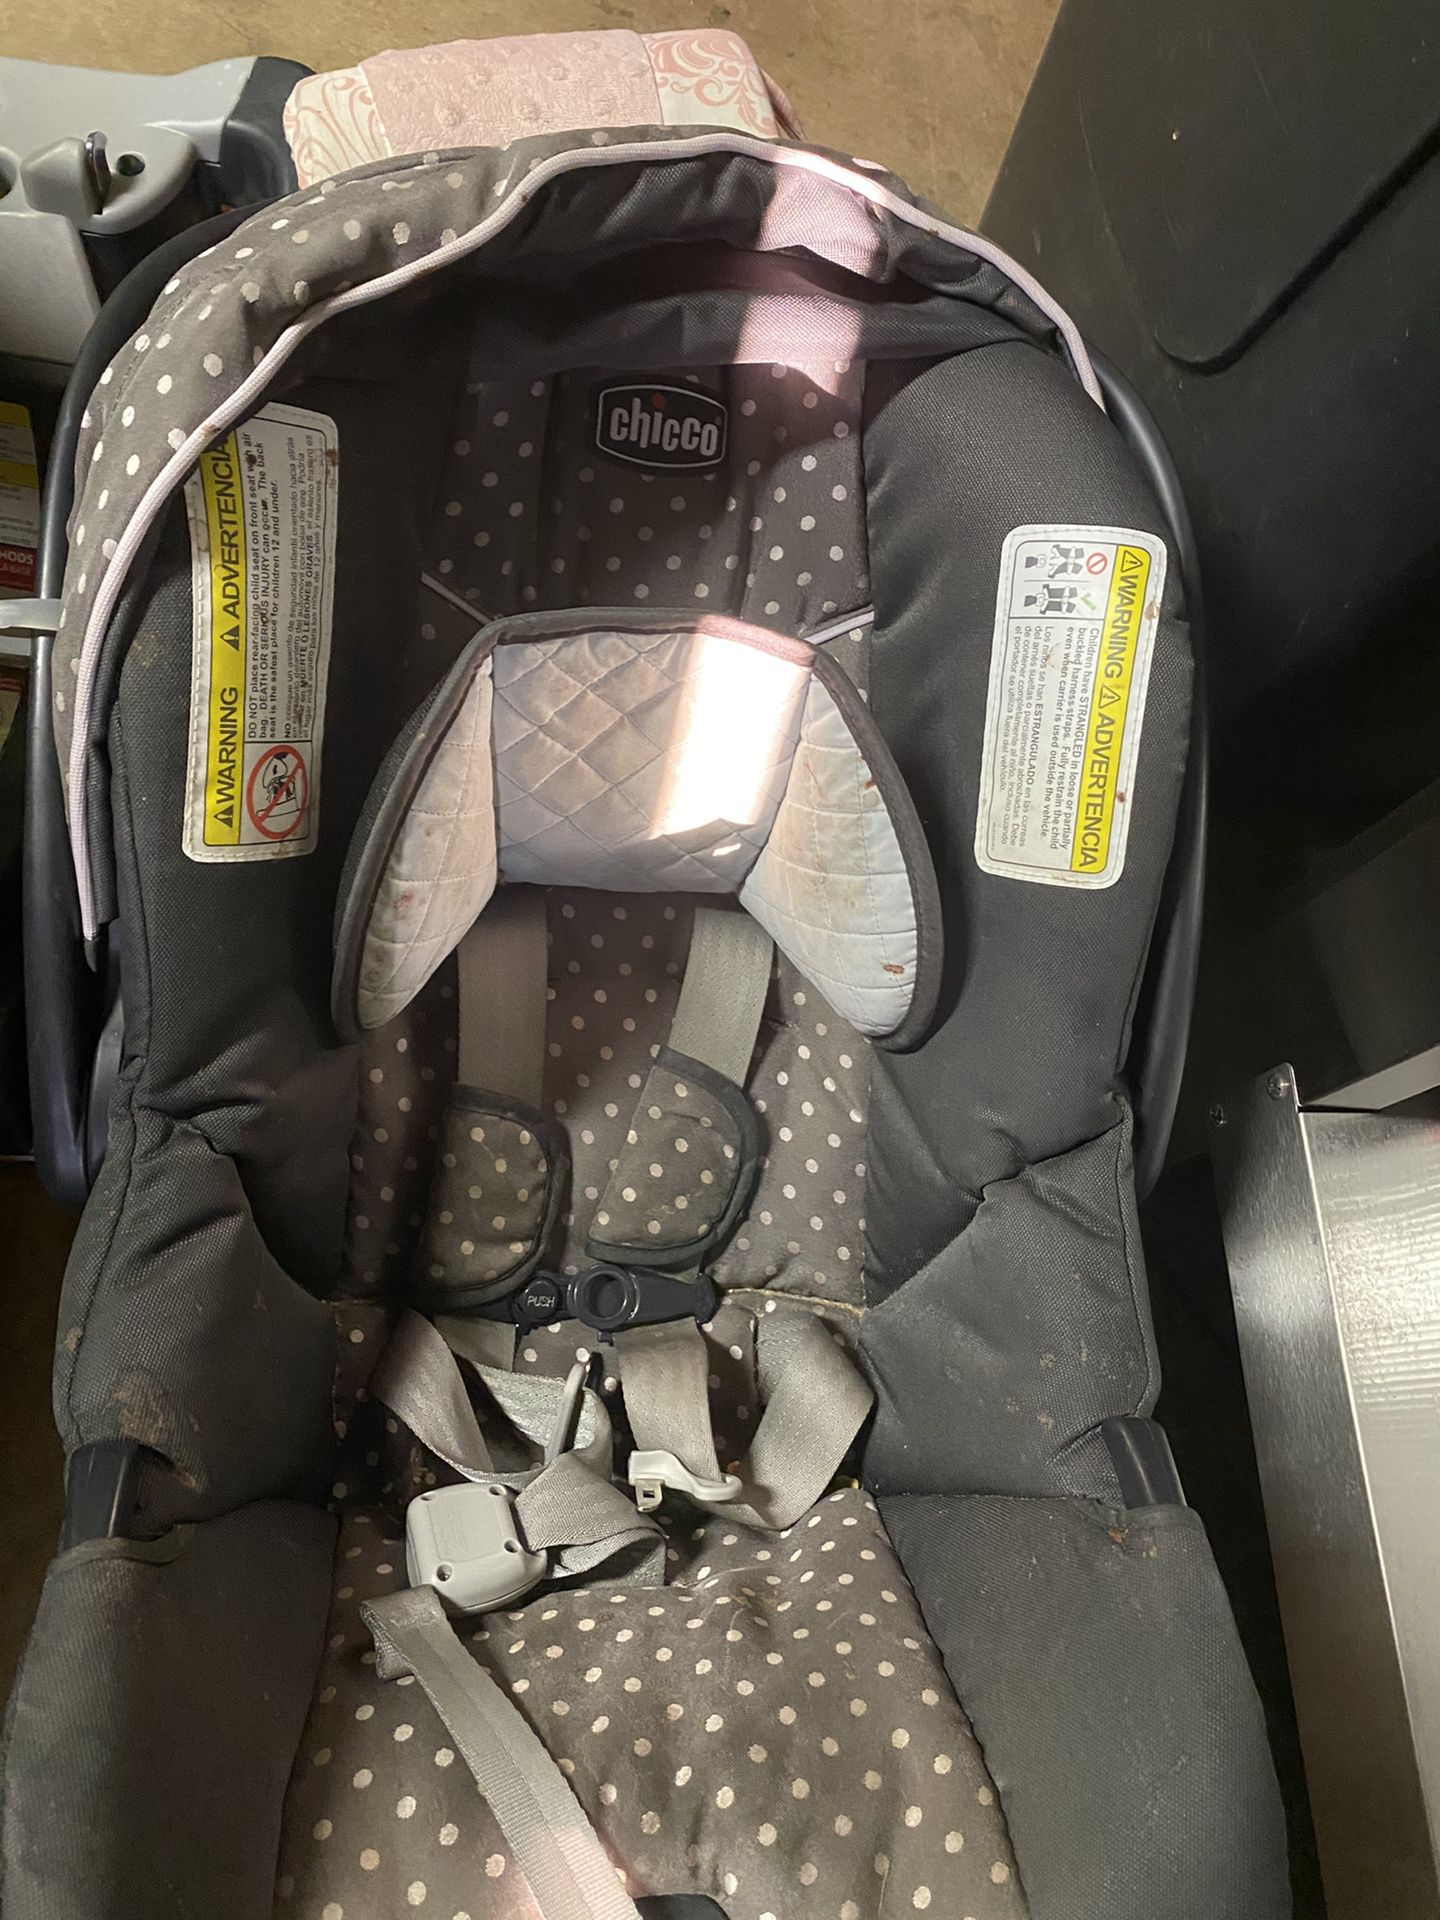 Chicco KeyFit 30 infant car seat, pink